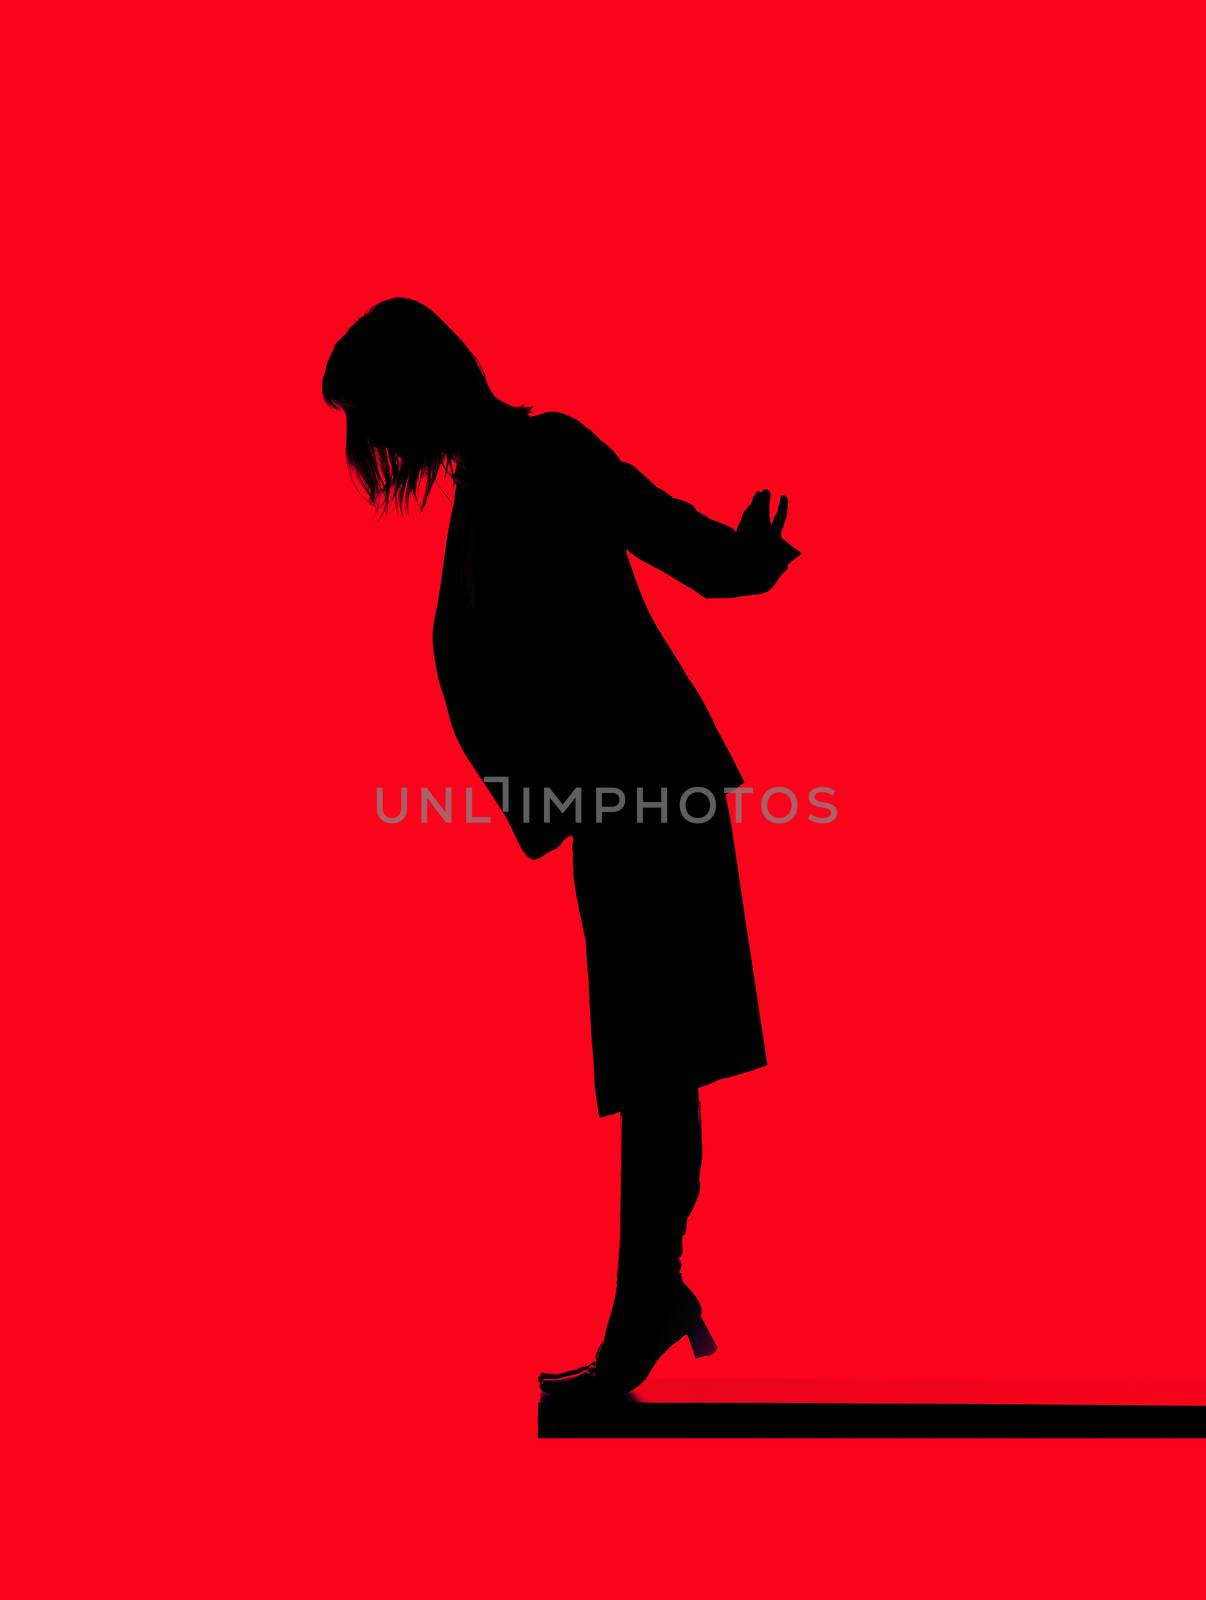 Silhouette of a woman close to fall down isolated on red background